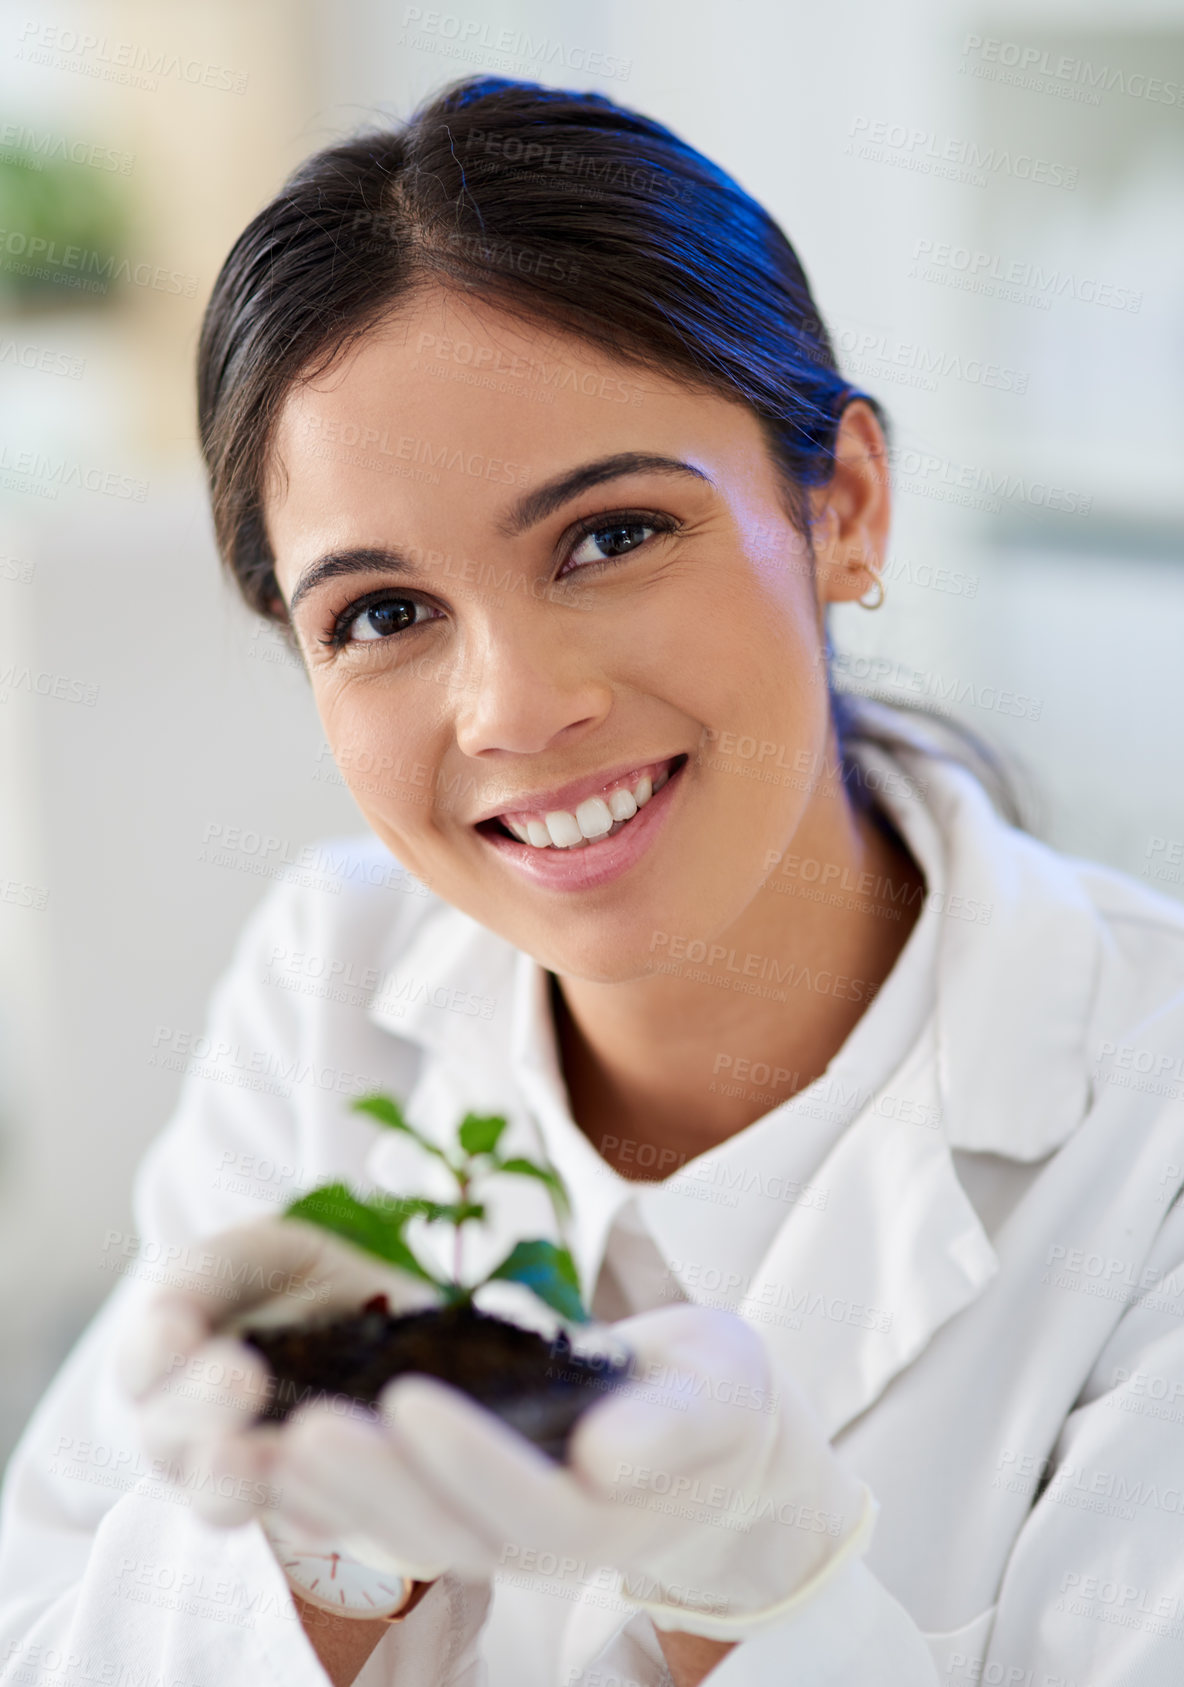 Buy stock photo Portrait of a young scientist holding a plant in a lab